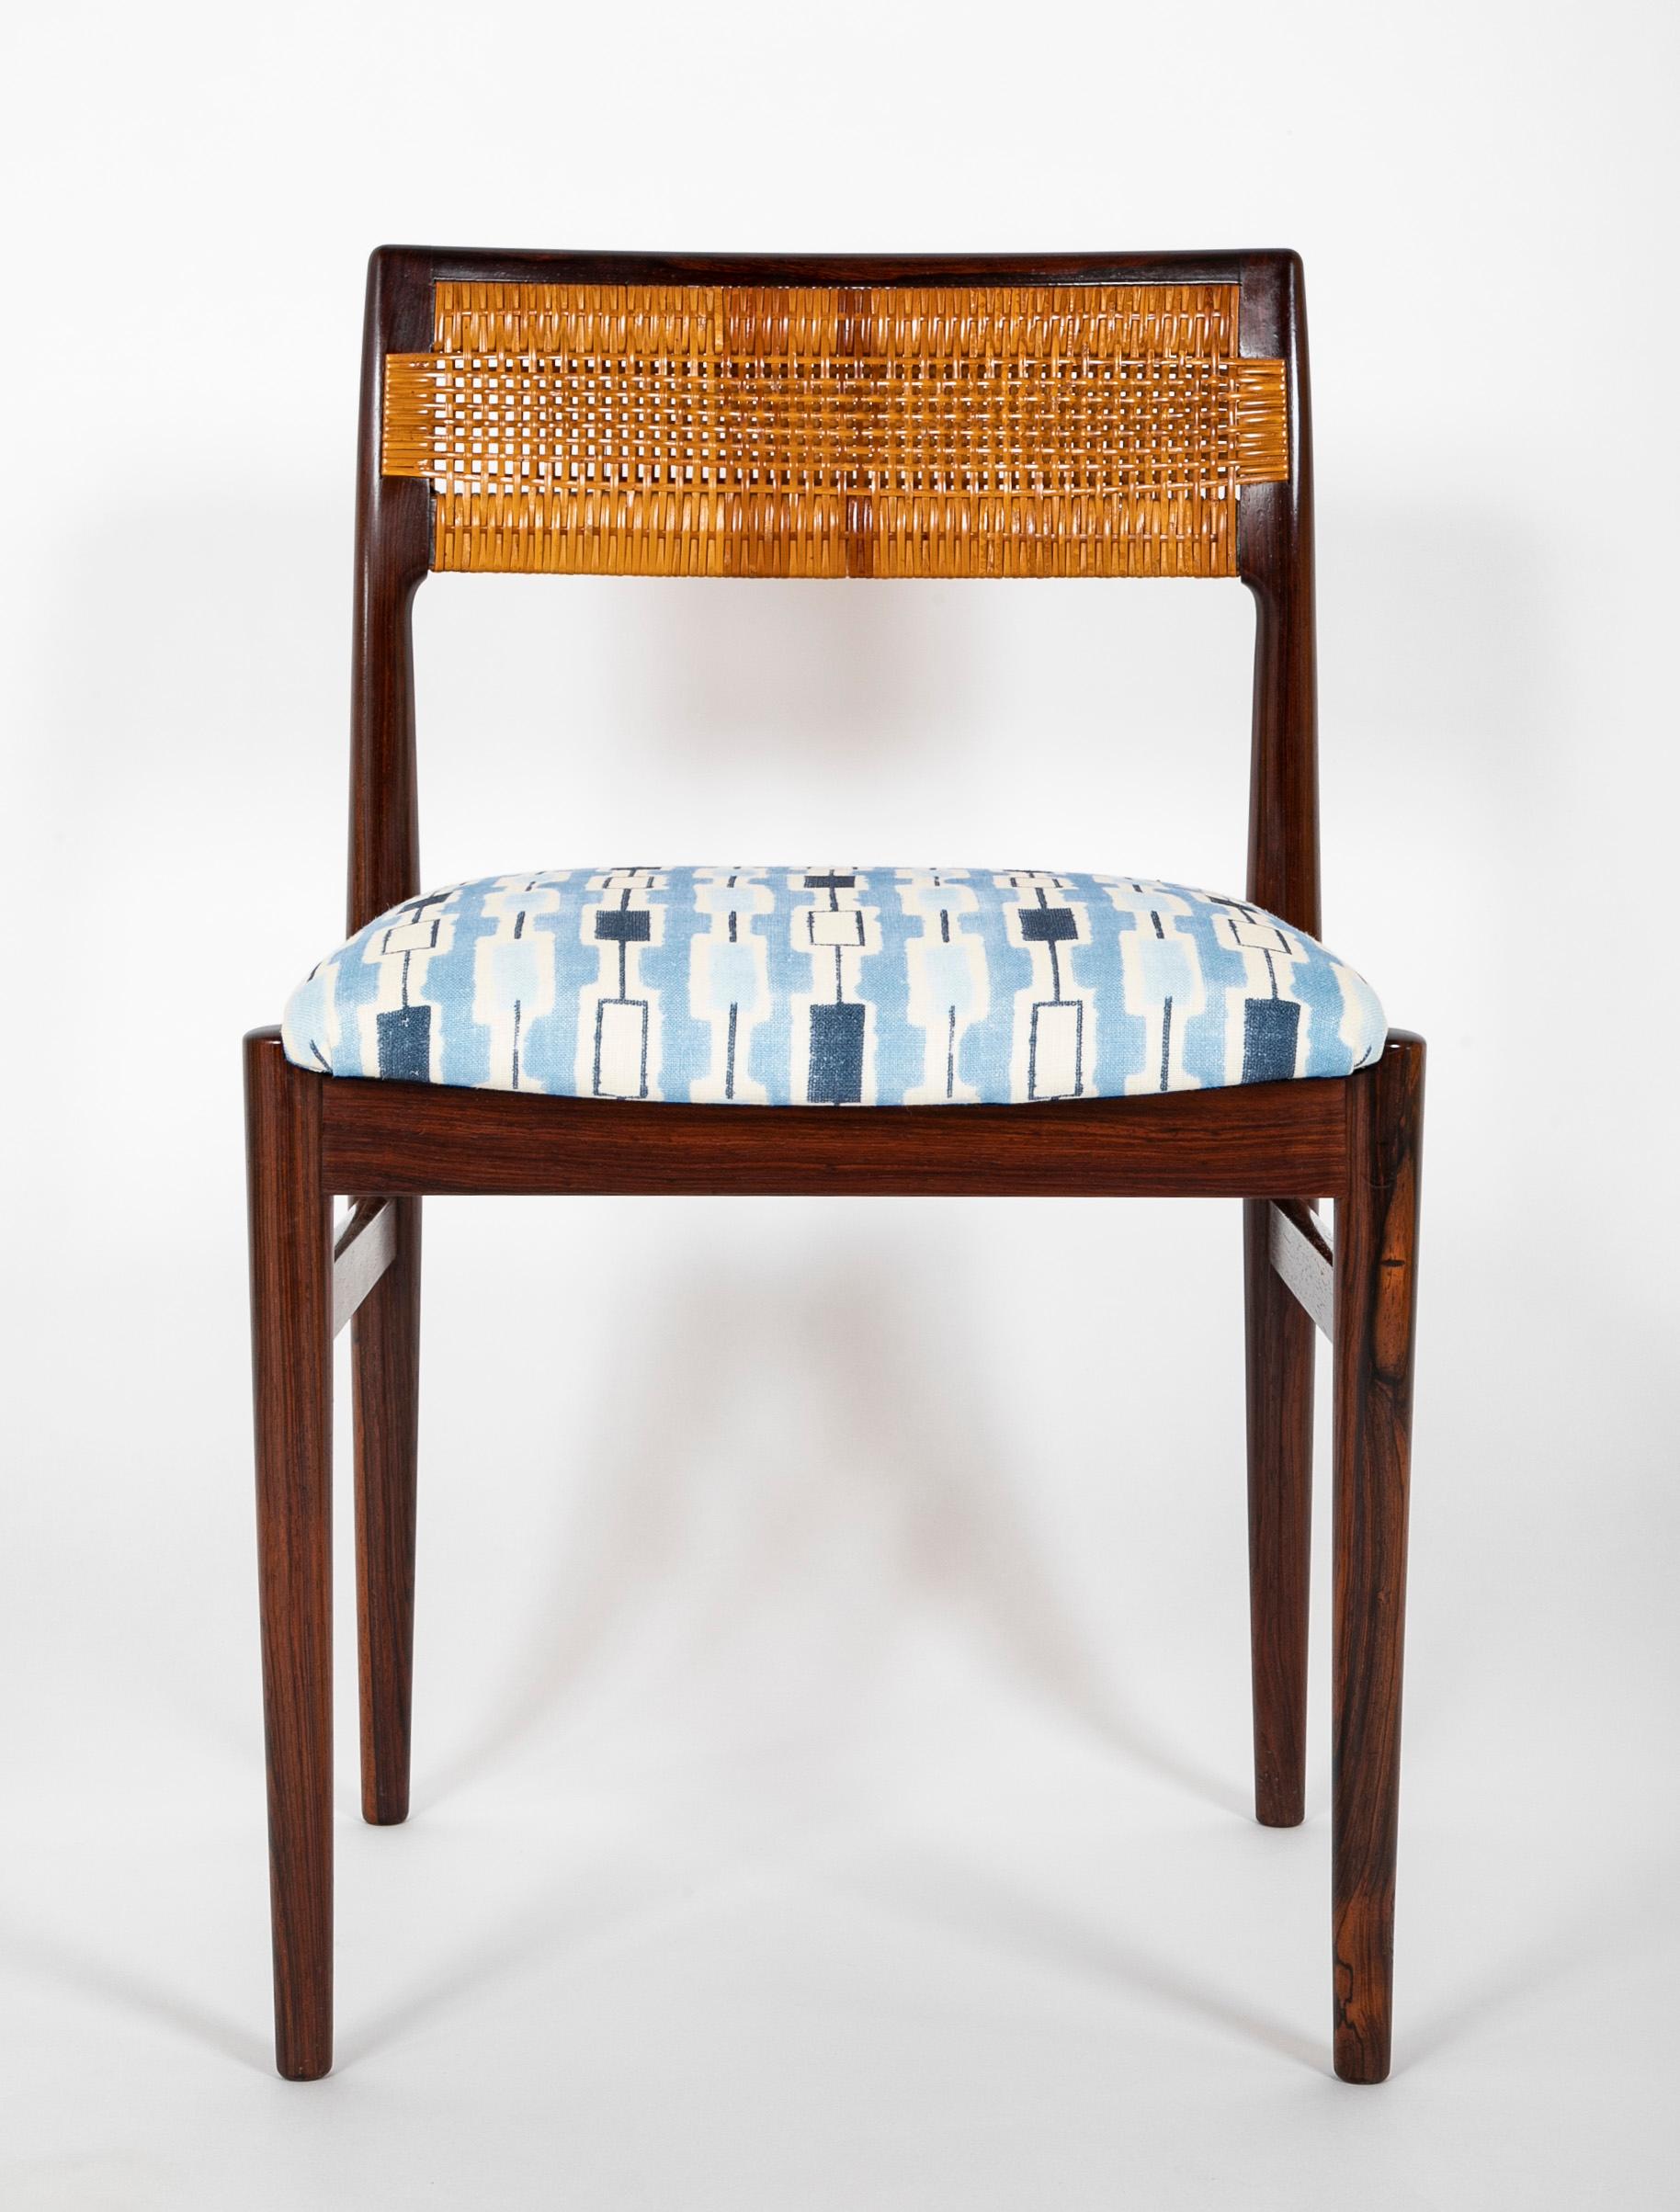 A handsome set of eight (8) rosewood dining chairs with caned backrest by Erik Wortz (Danish. 1916 - 1997). Denmark. Mid-20th century.